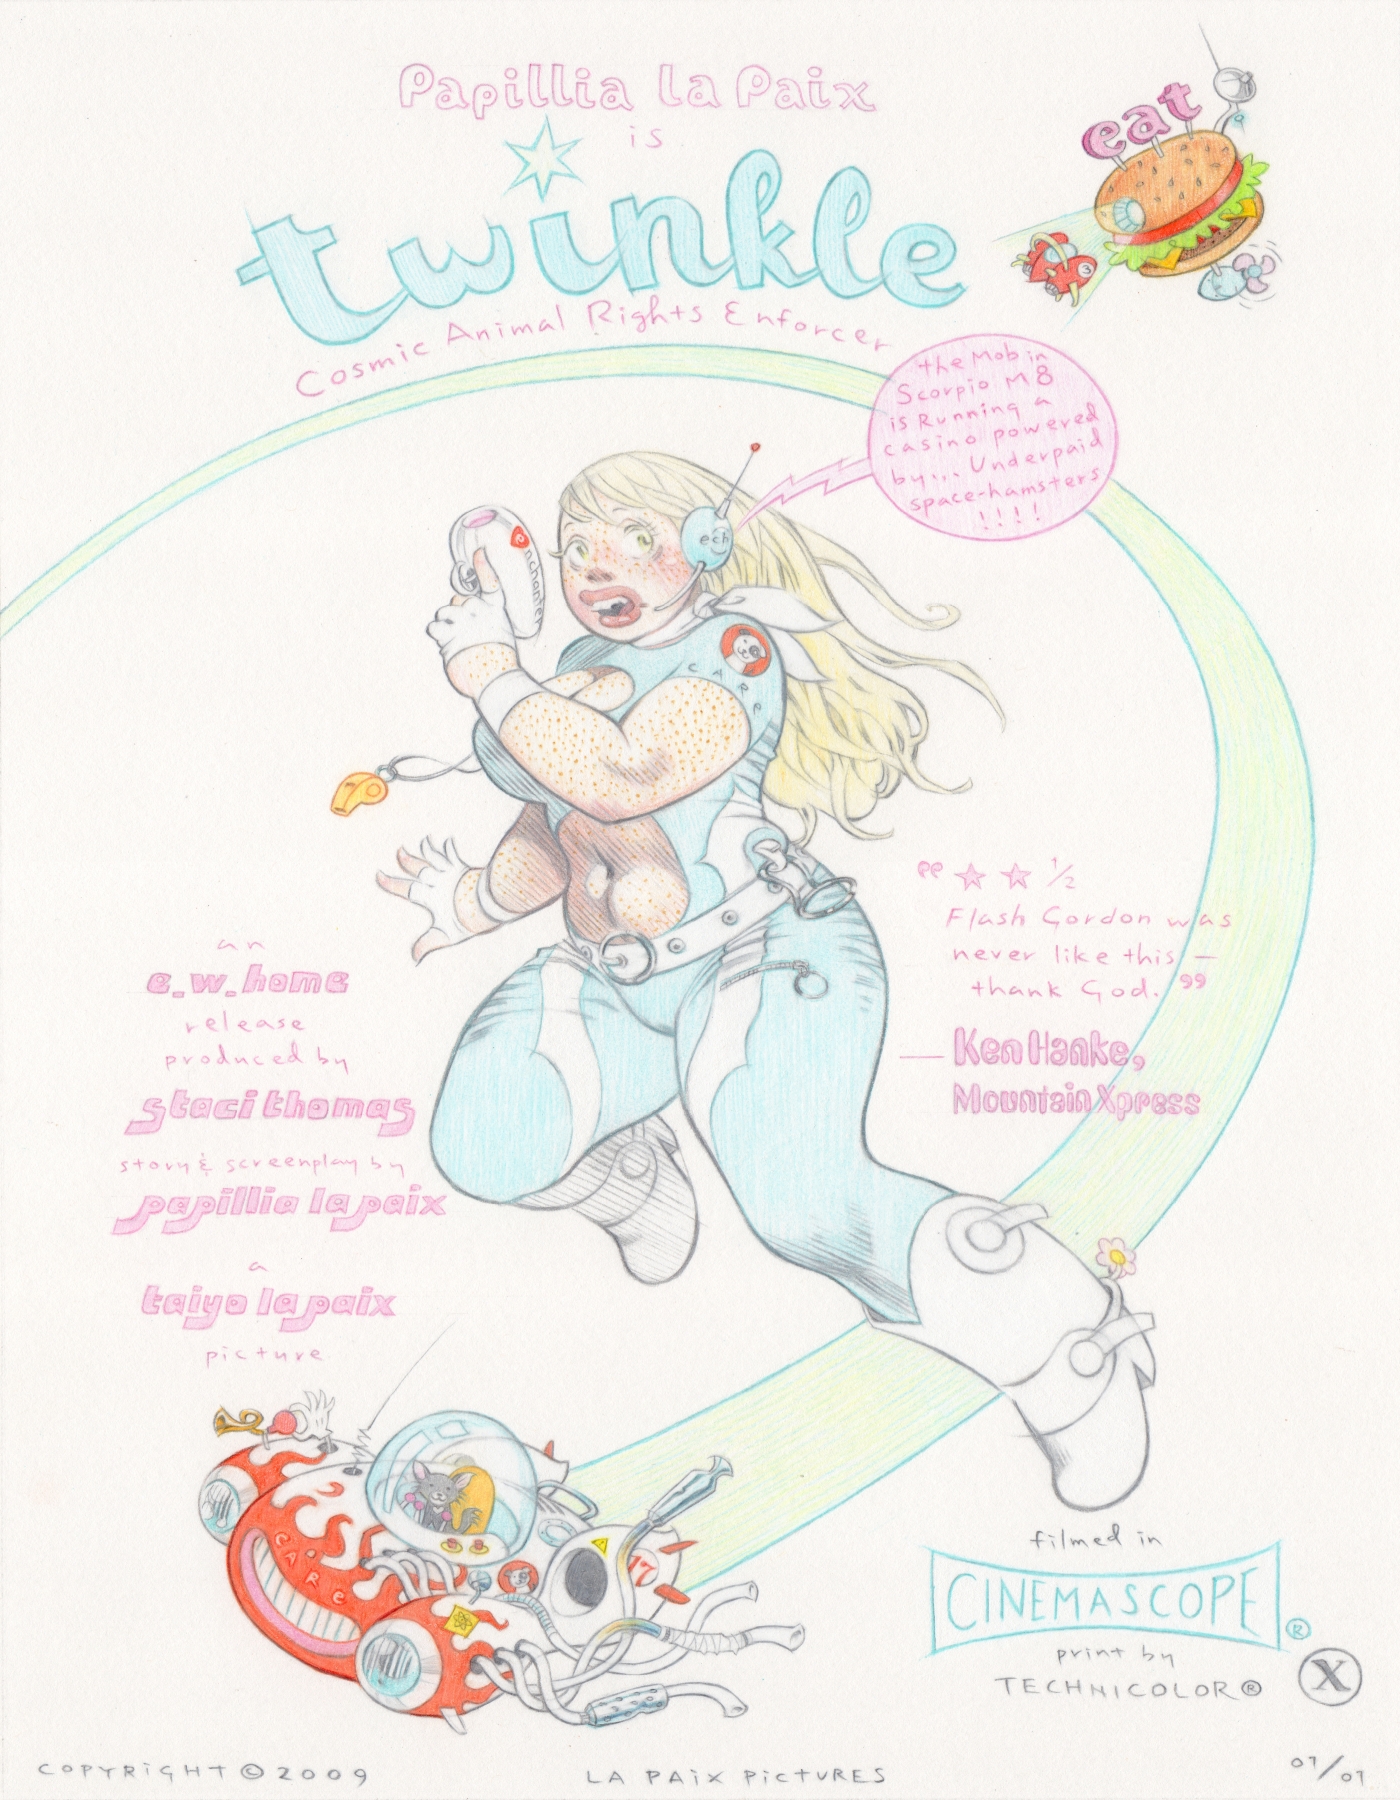 Twinkle, Cosmic Animal Rights Enforcer, 2009, courtesy of Darwin and Kathleen Stanley, pencil on paper, 11 x 8.5 inches